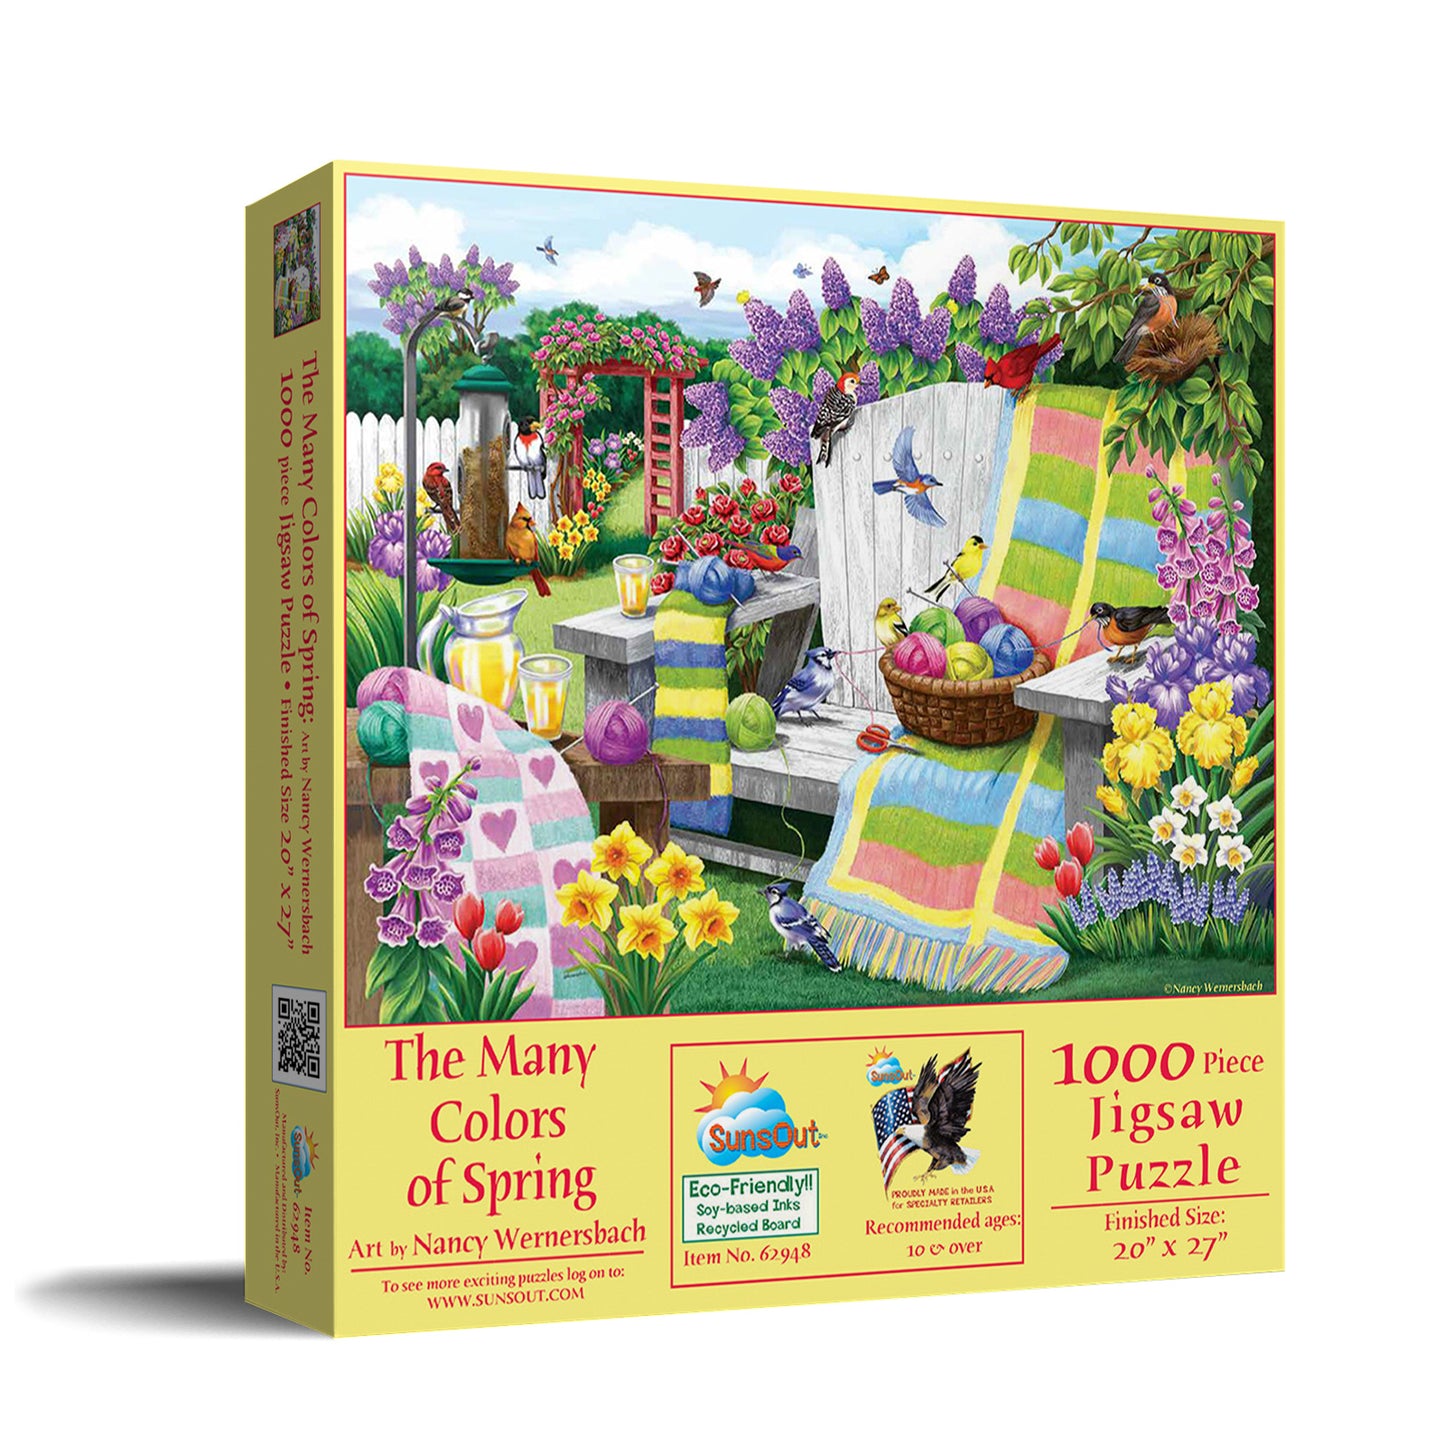 The Many Colors of Spring - 1000 Piece Jigsaw Puzzle